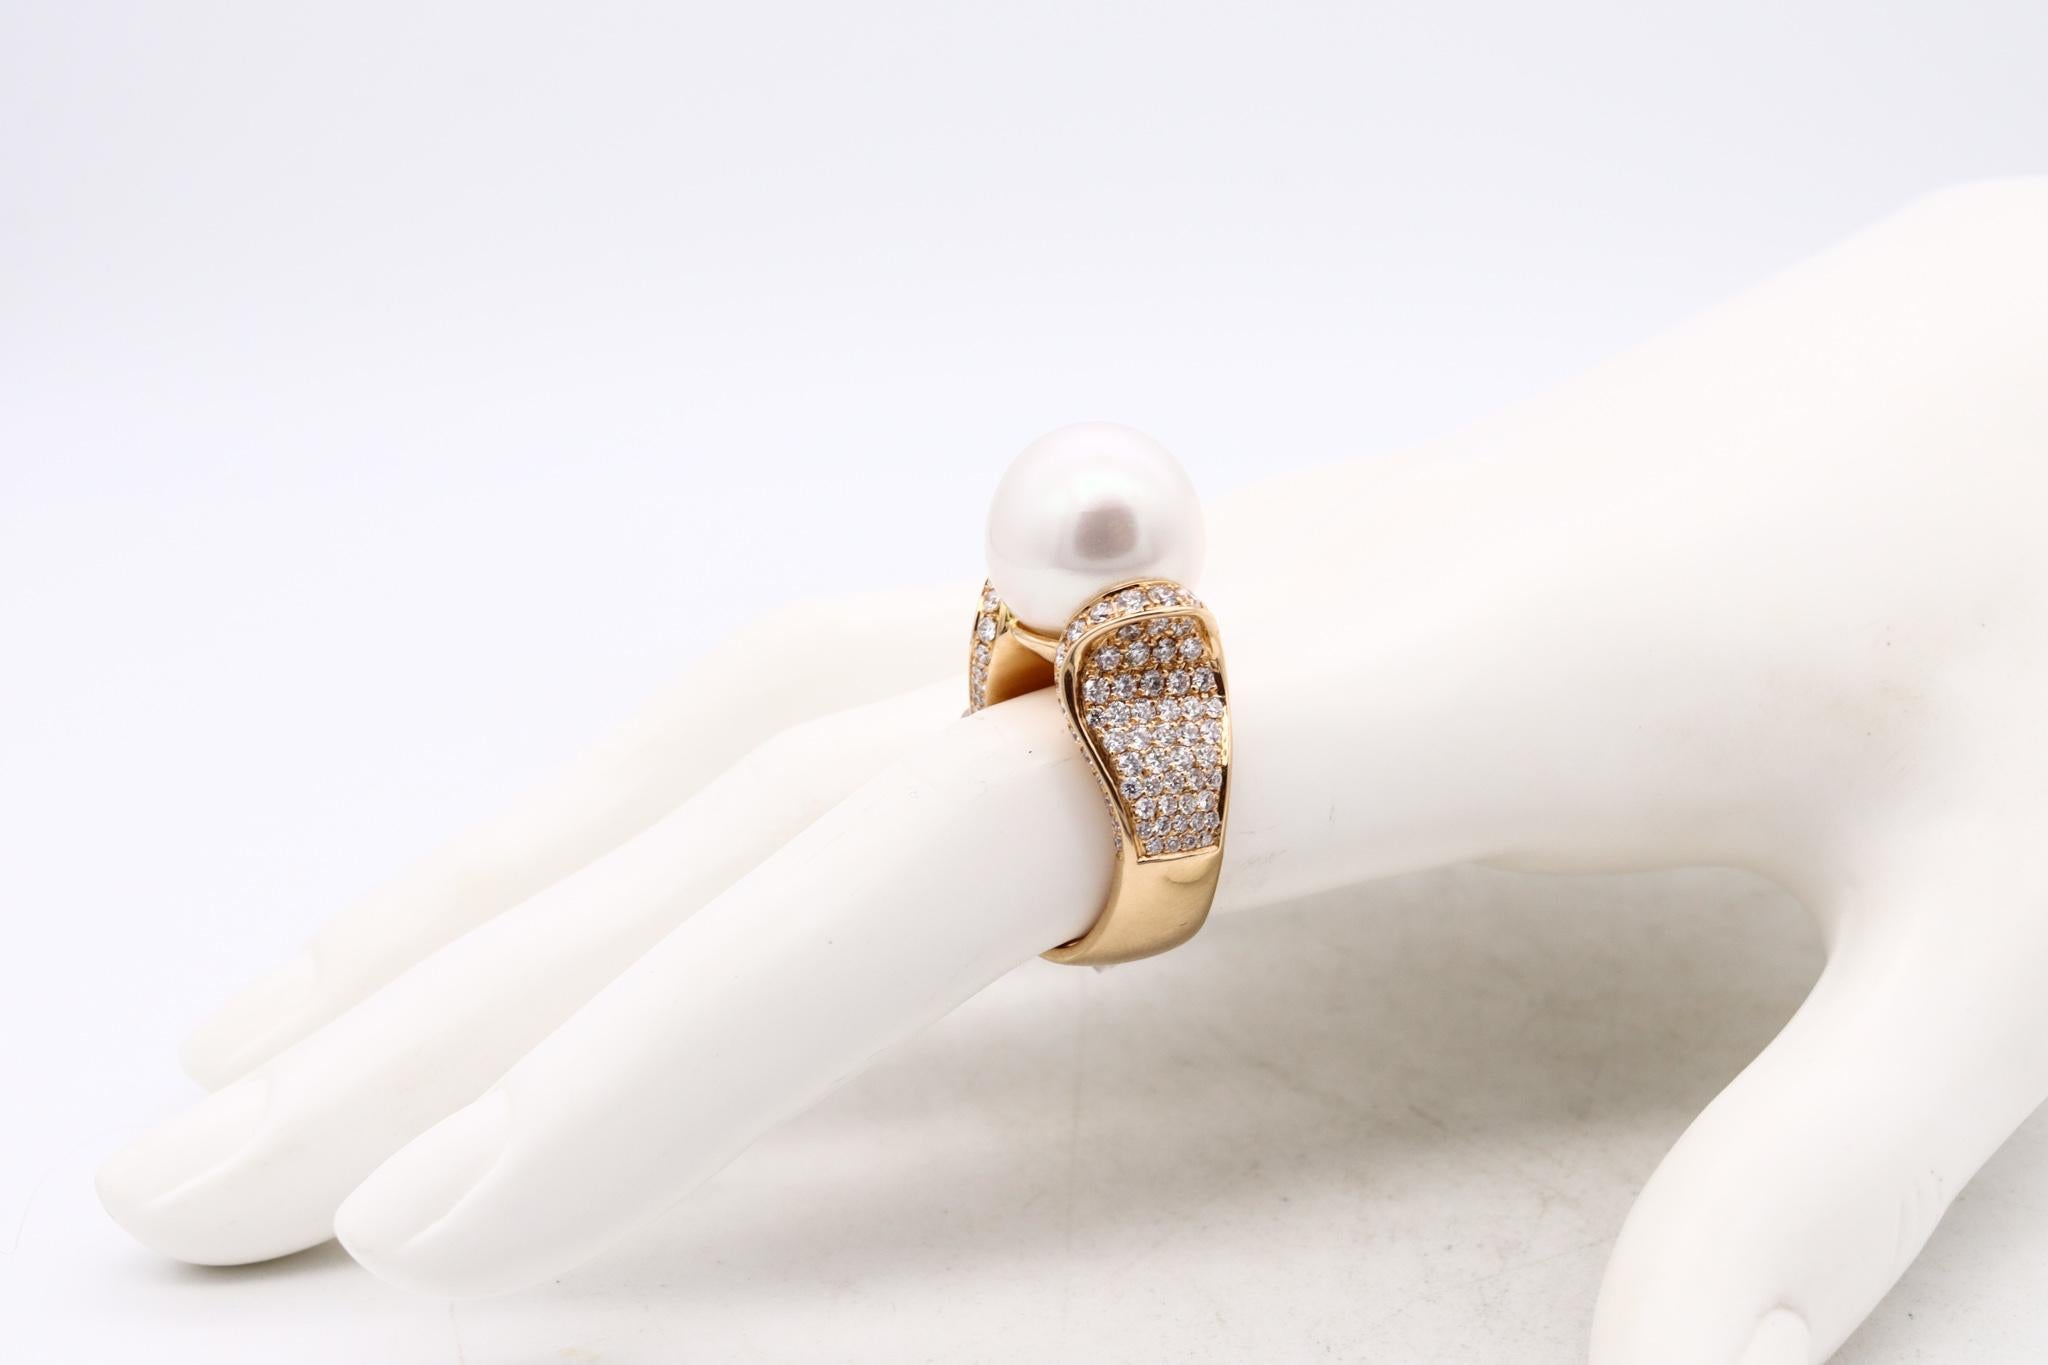 Modern Hans D Krieger Ring 18kt Gold with 1.67 Cts Diamonds and White Pearl